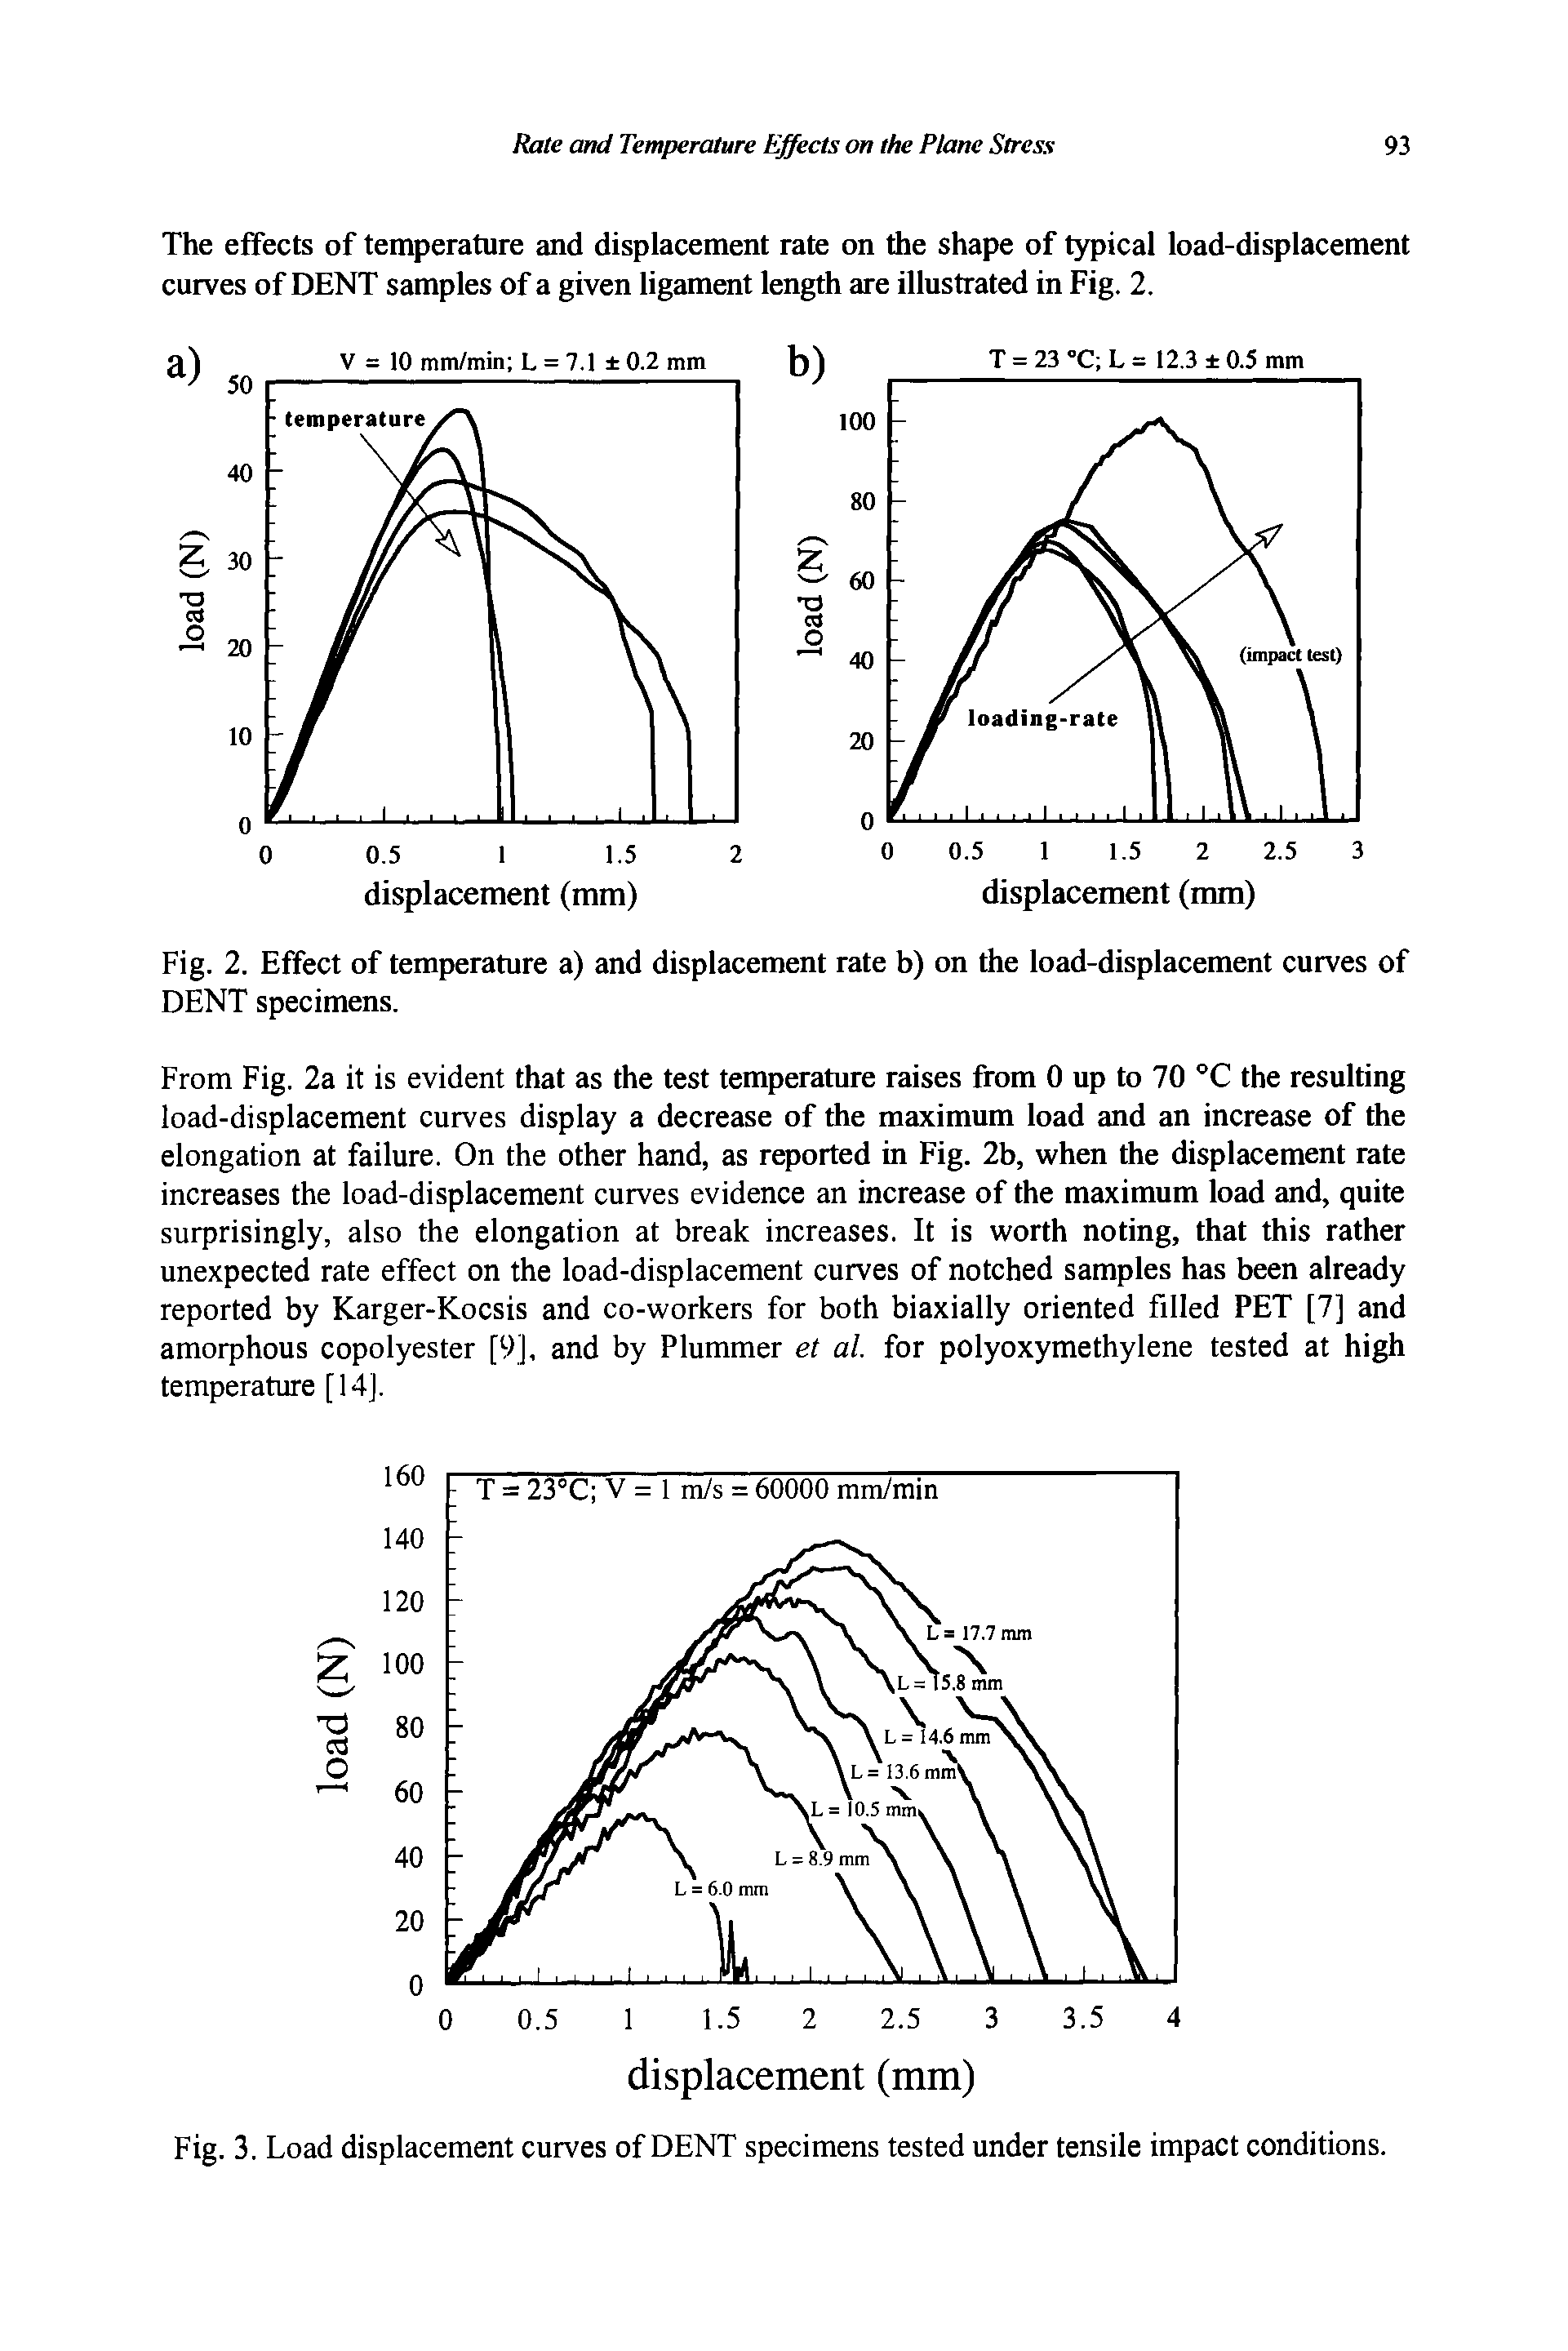 Fig. 2. Effect of temperature a) and displacement rate b) on the load-displacement curves of DENT specimens.